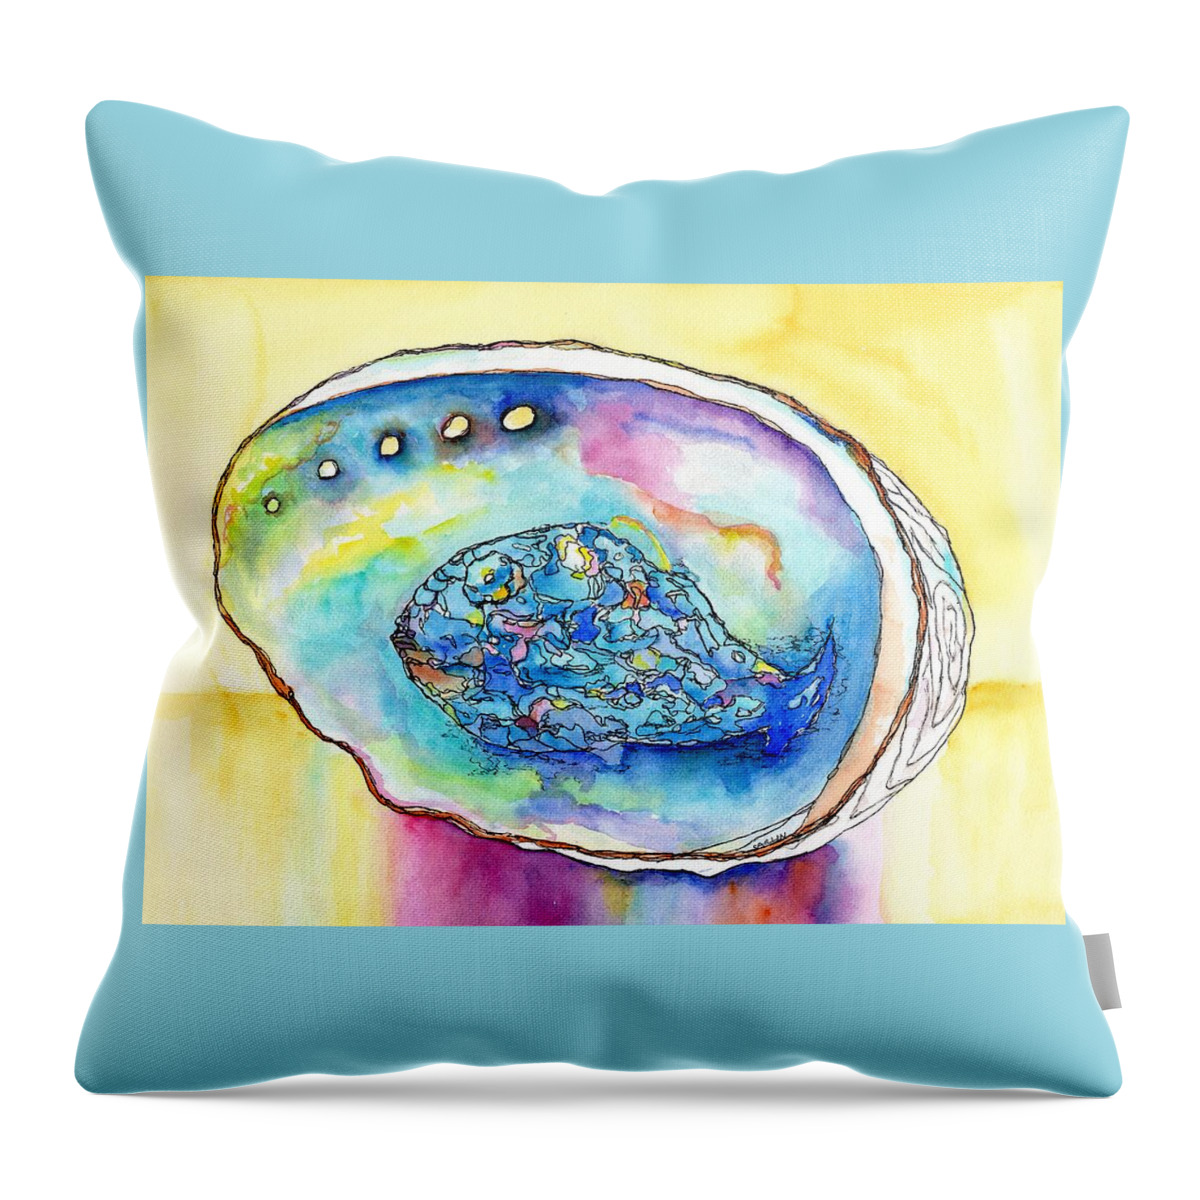 Shell Throw Pillow featuring the painting Abalone Shell Reflections by Carlin Blahnik CarlinArtWatercolor